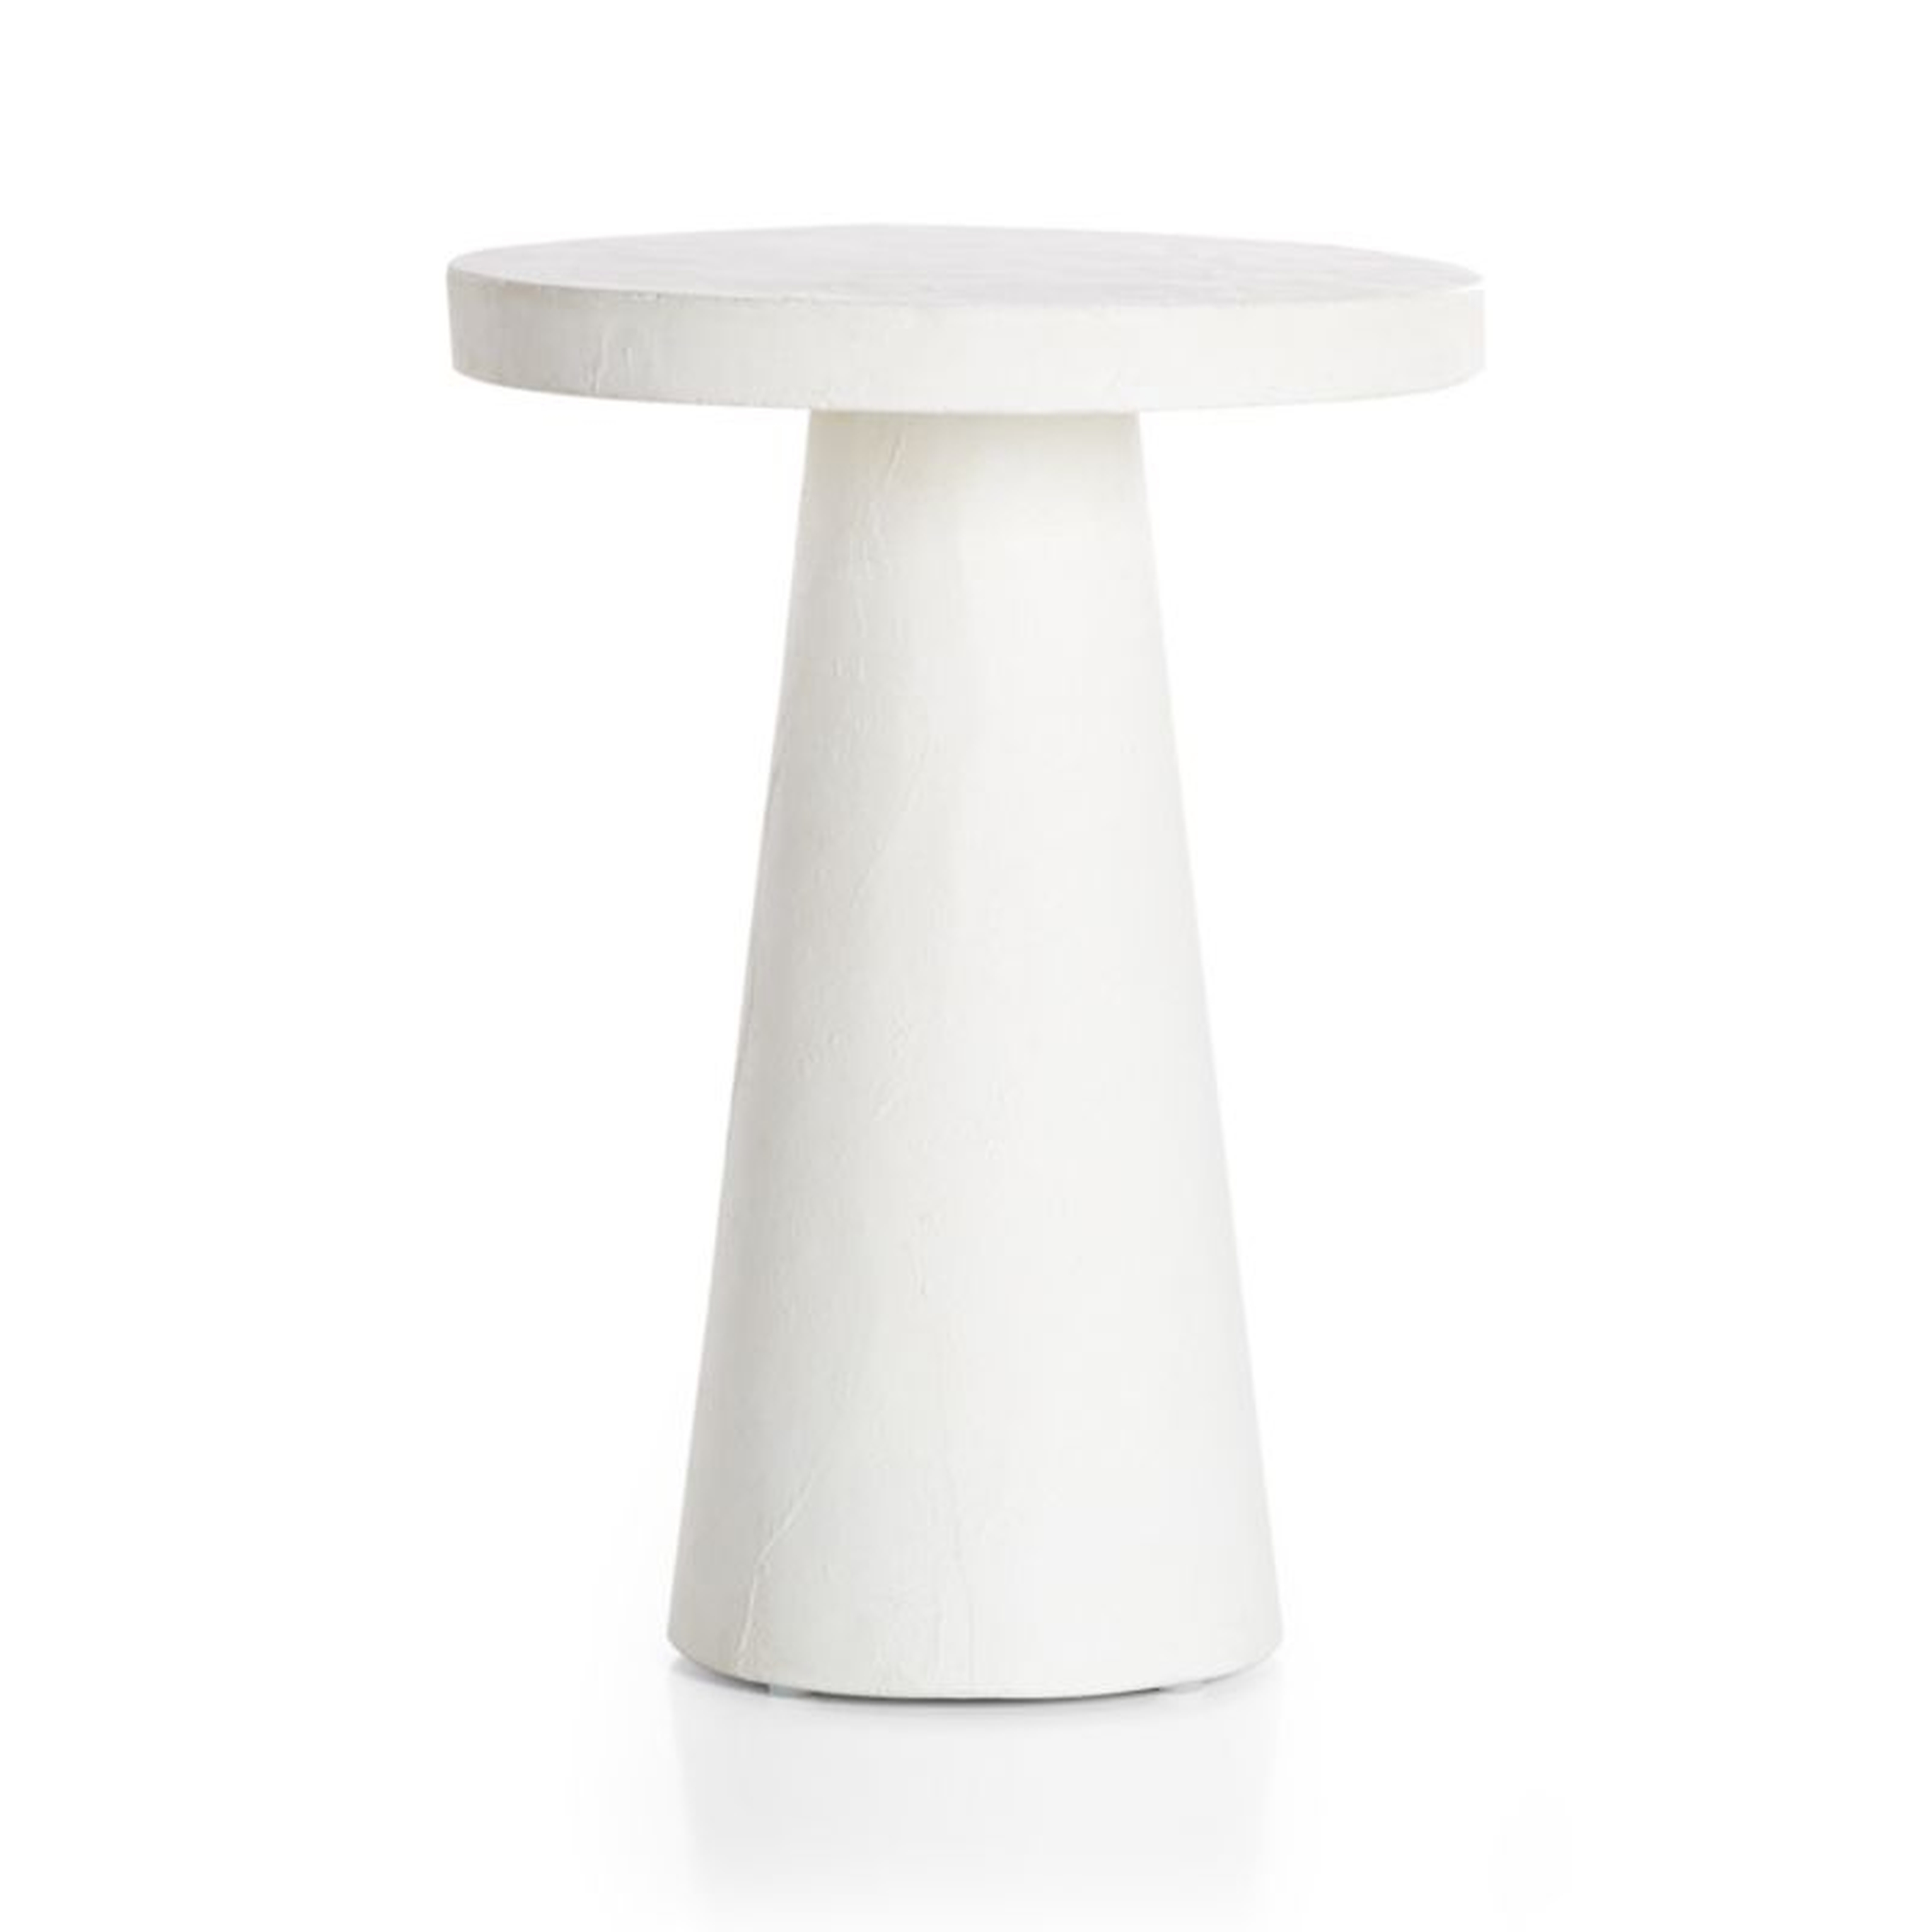 Willy Plaster Pedestal Side Table, White - Crate and Barrel